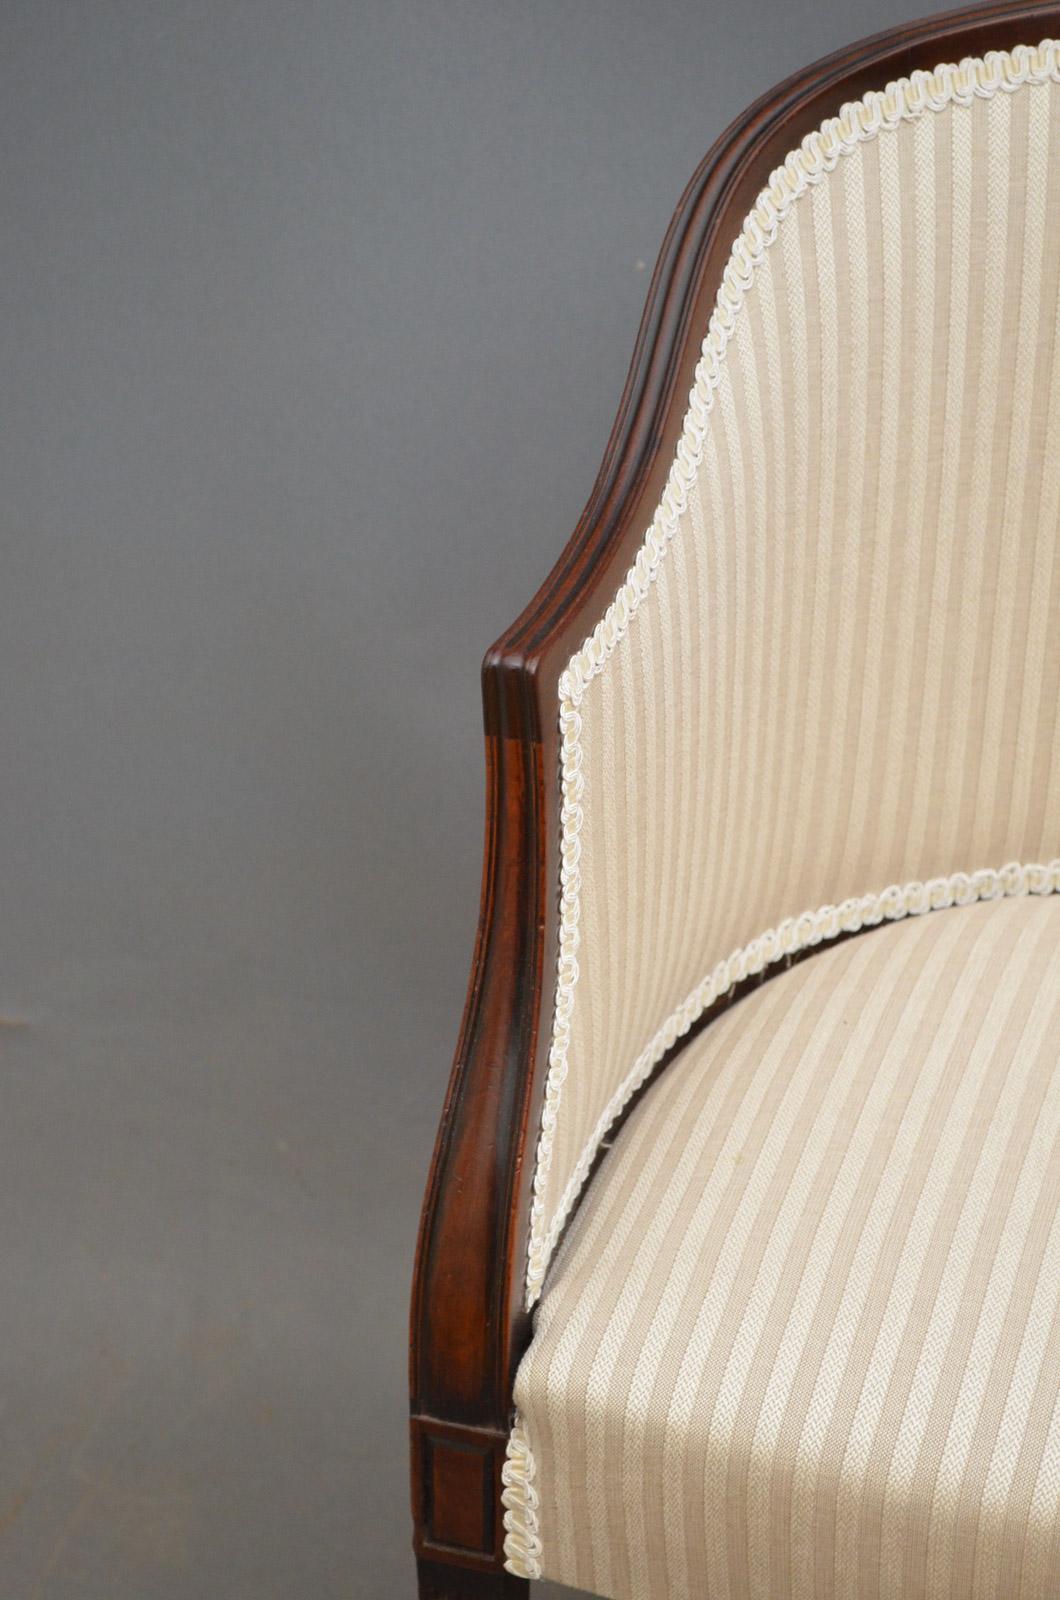 Sn3688, an elegant Edwardian tub chair in mahogany, having reeded rail terminating in shaped arms, generous seat and reeded legs terminating in pad feet. This mahogany armchair is in excellent condition throughout, ready to place at home, circa